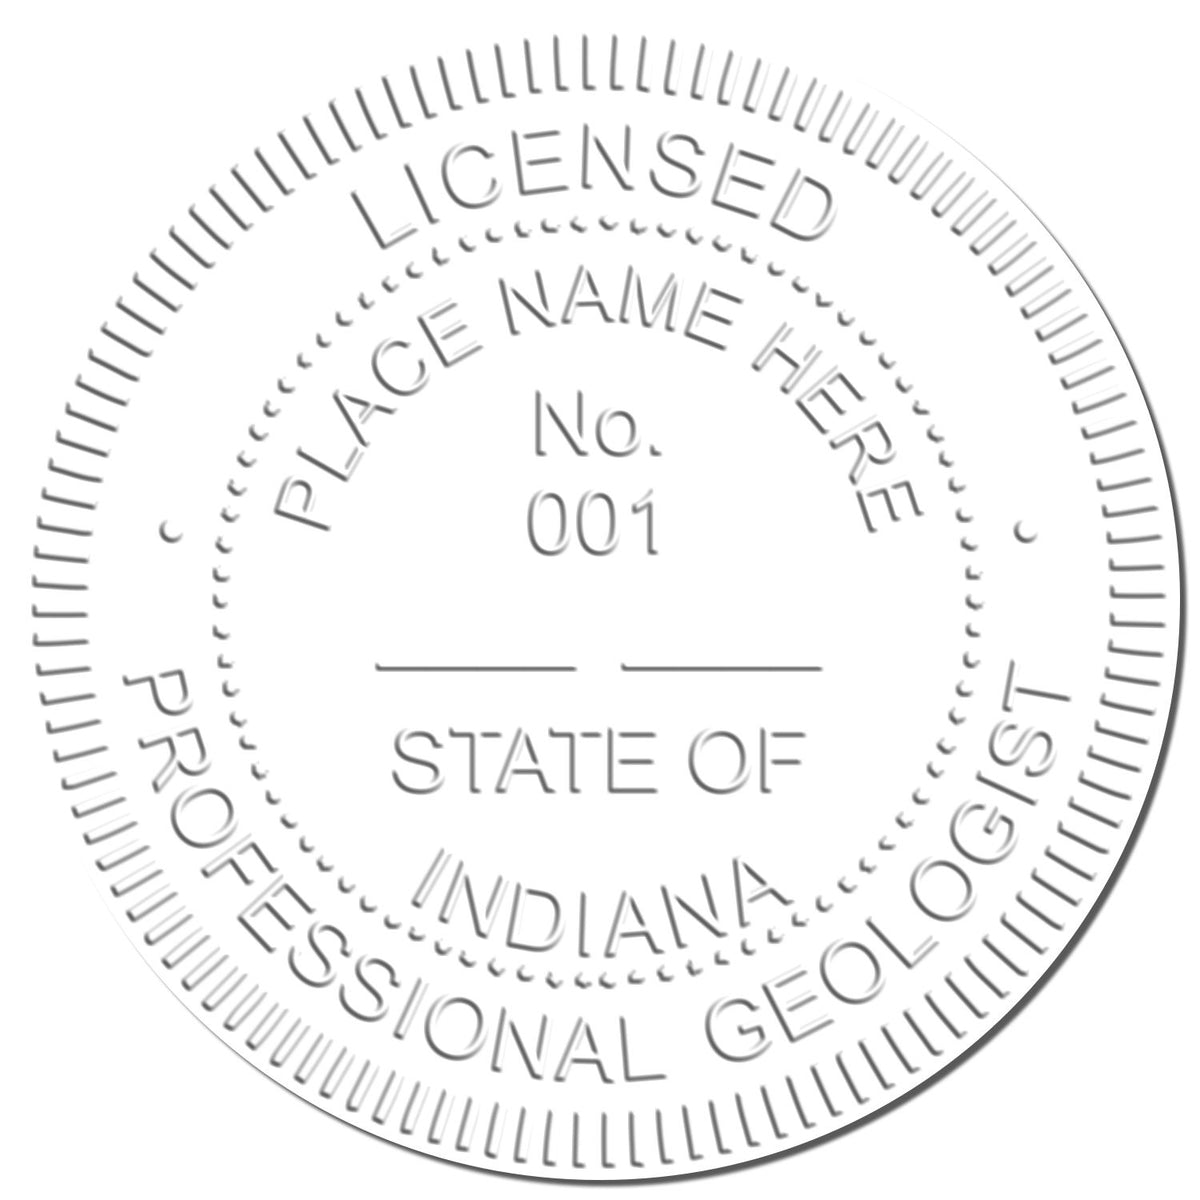 The Indiana Geologist Desk Seal stamp impression comes to life with a crisp, detailed image stamped on paper - showcasing true professional quality.